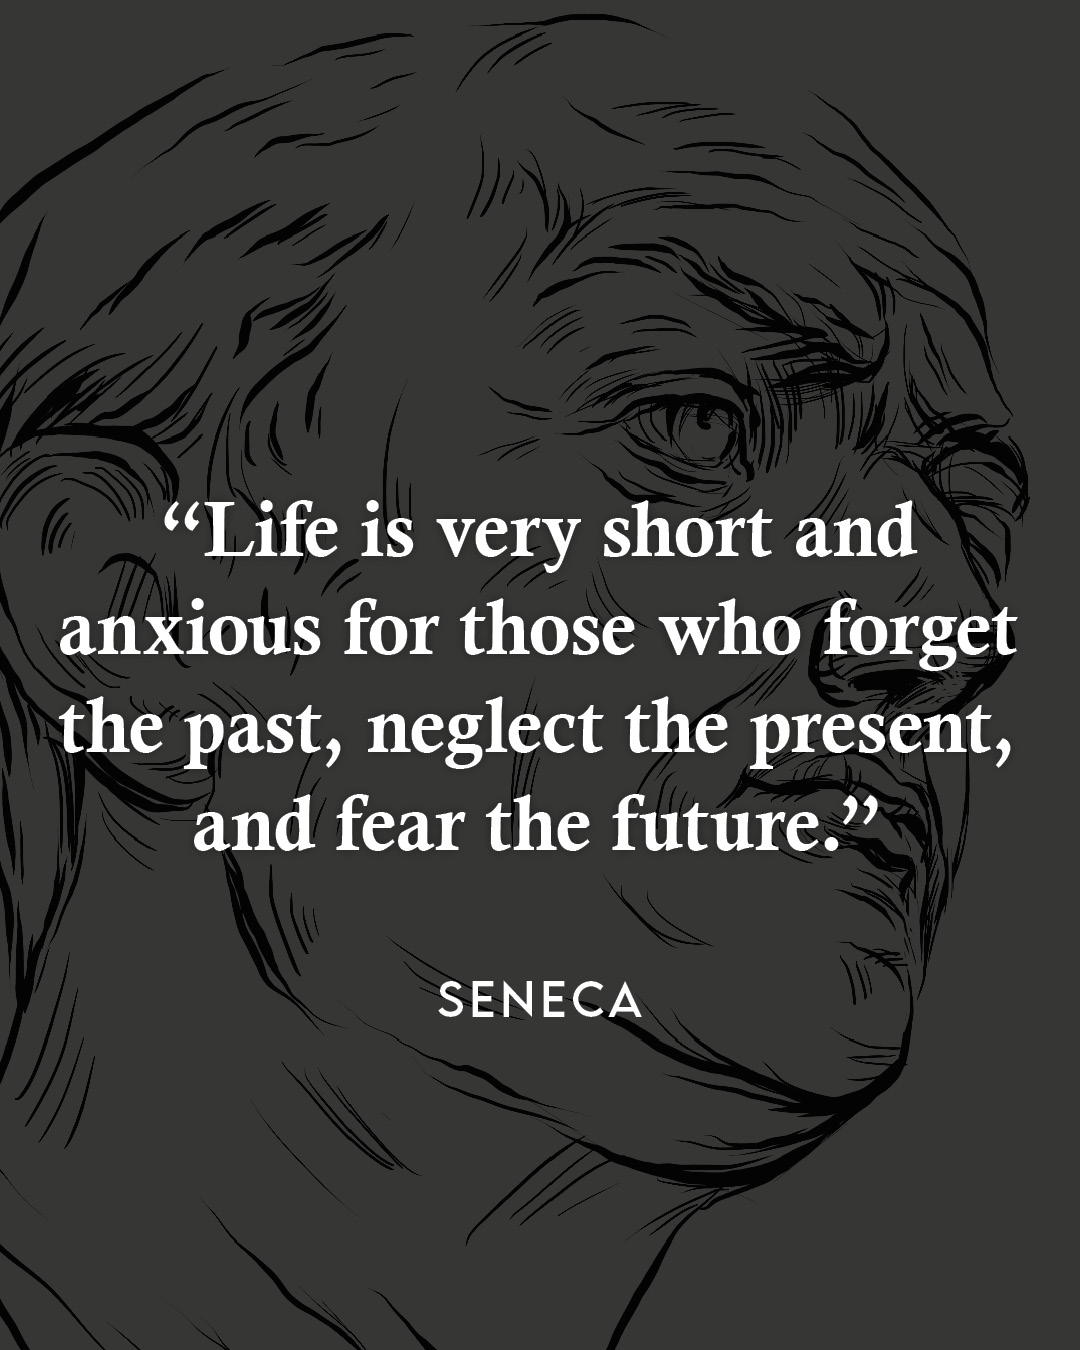 Life is very short and anxious for those who forget the past, neglect the present, and fear the future.